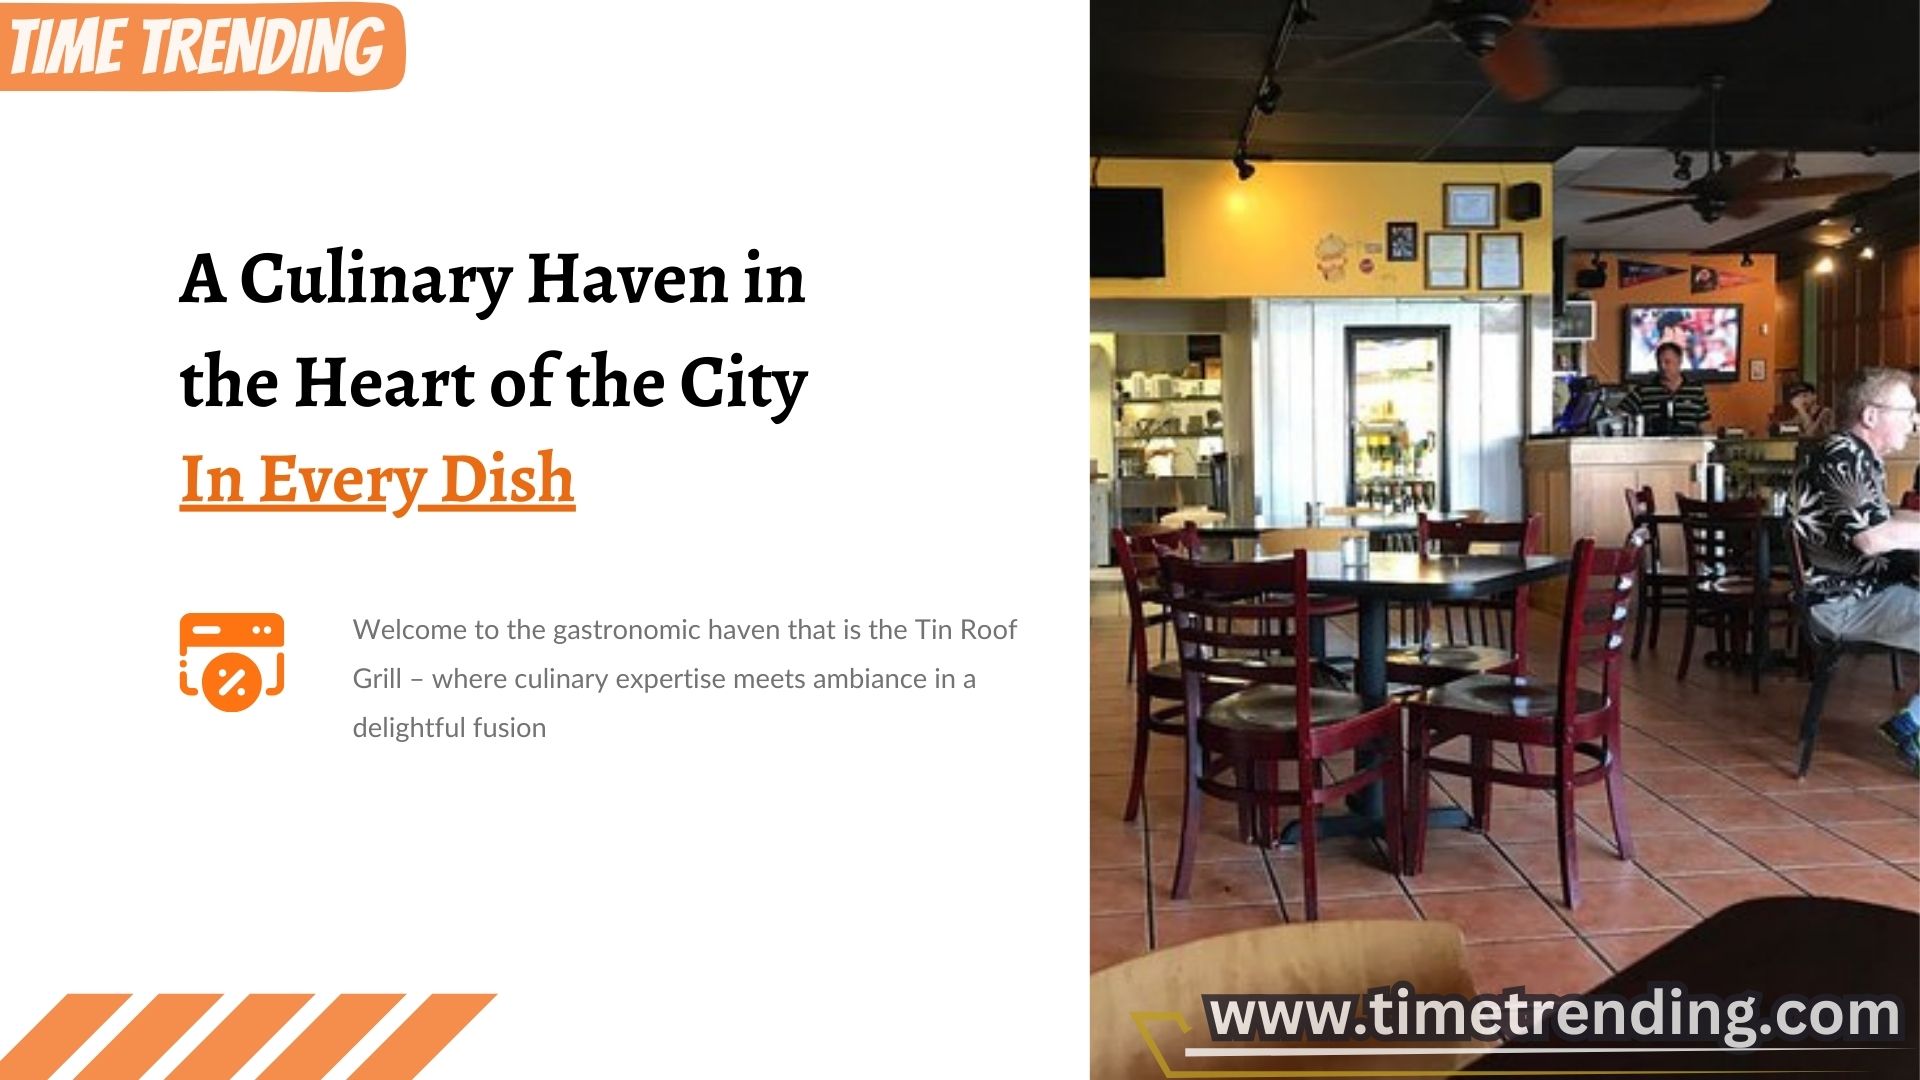 A Culinary Haven in the Heart of the City